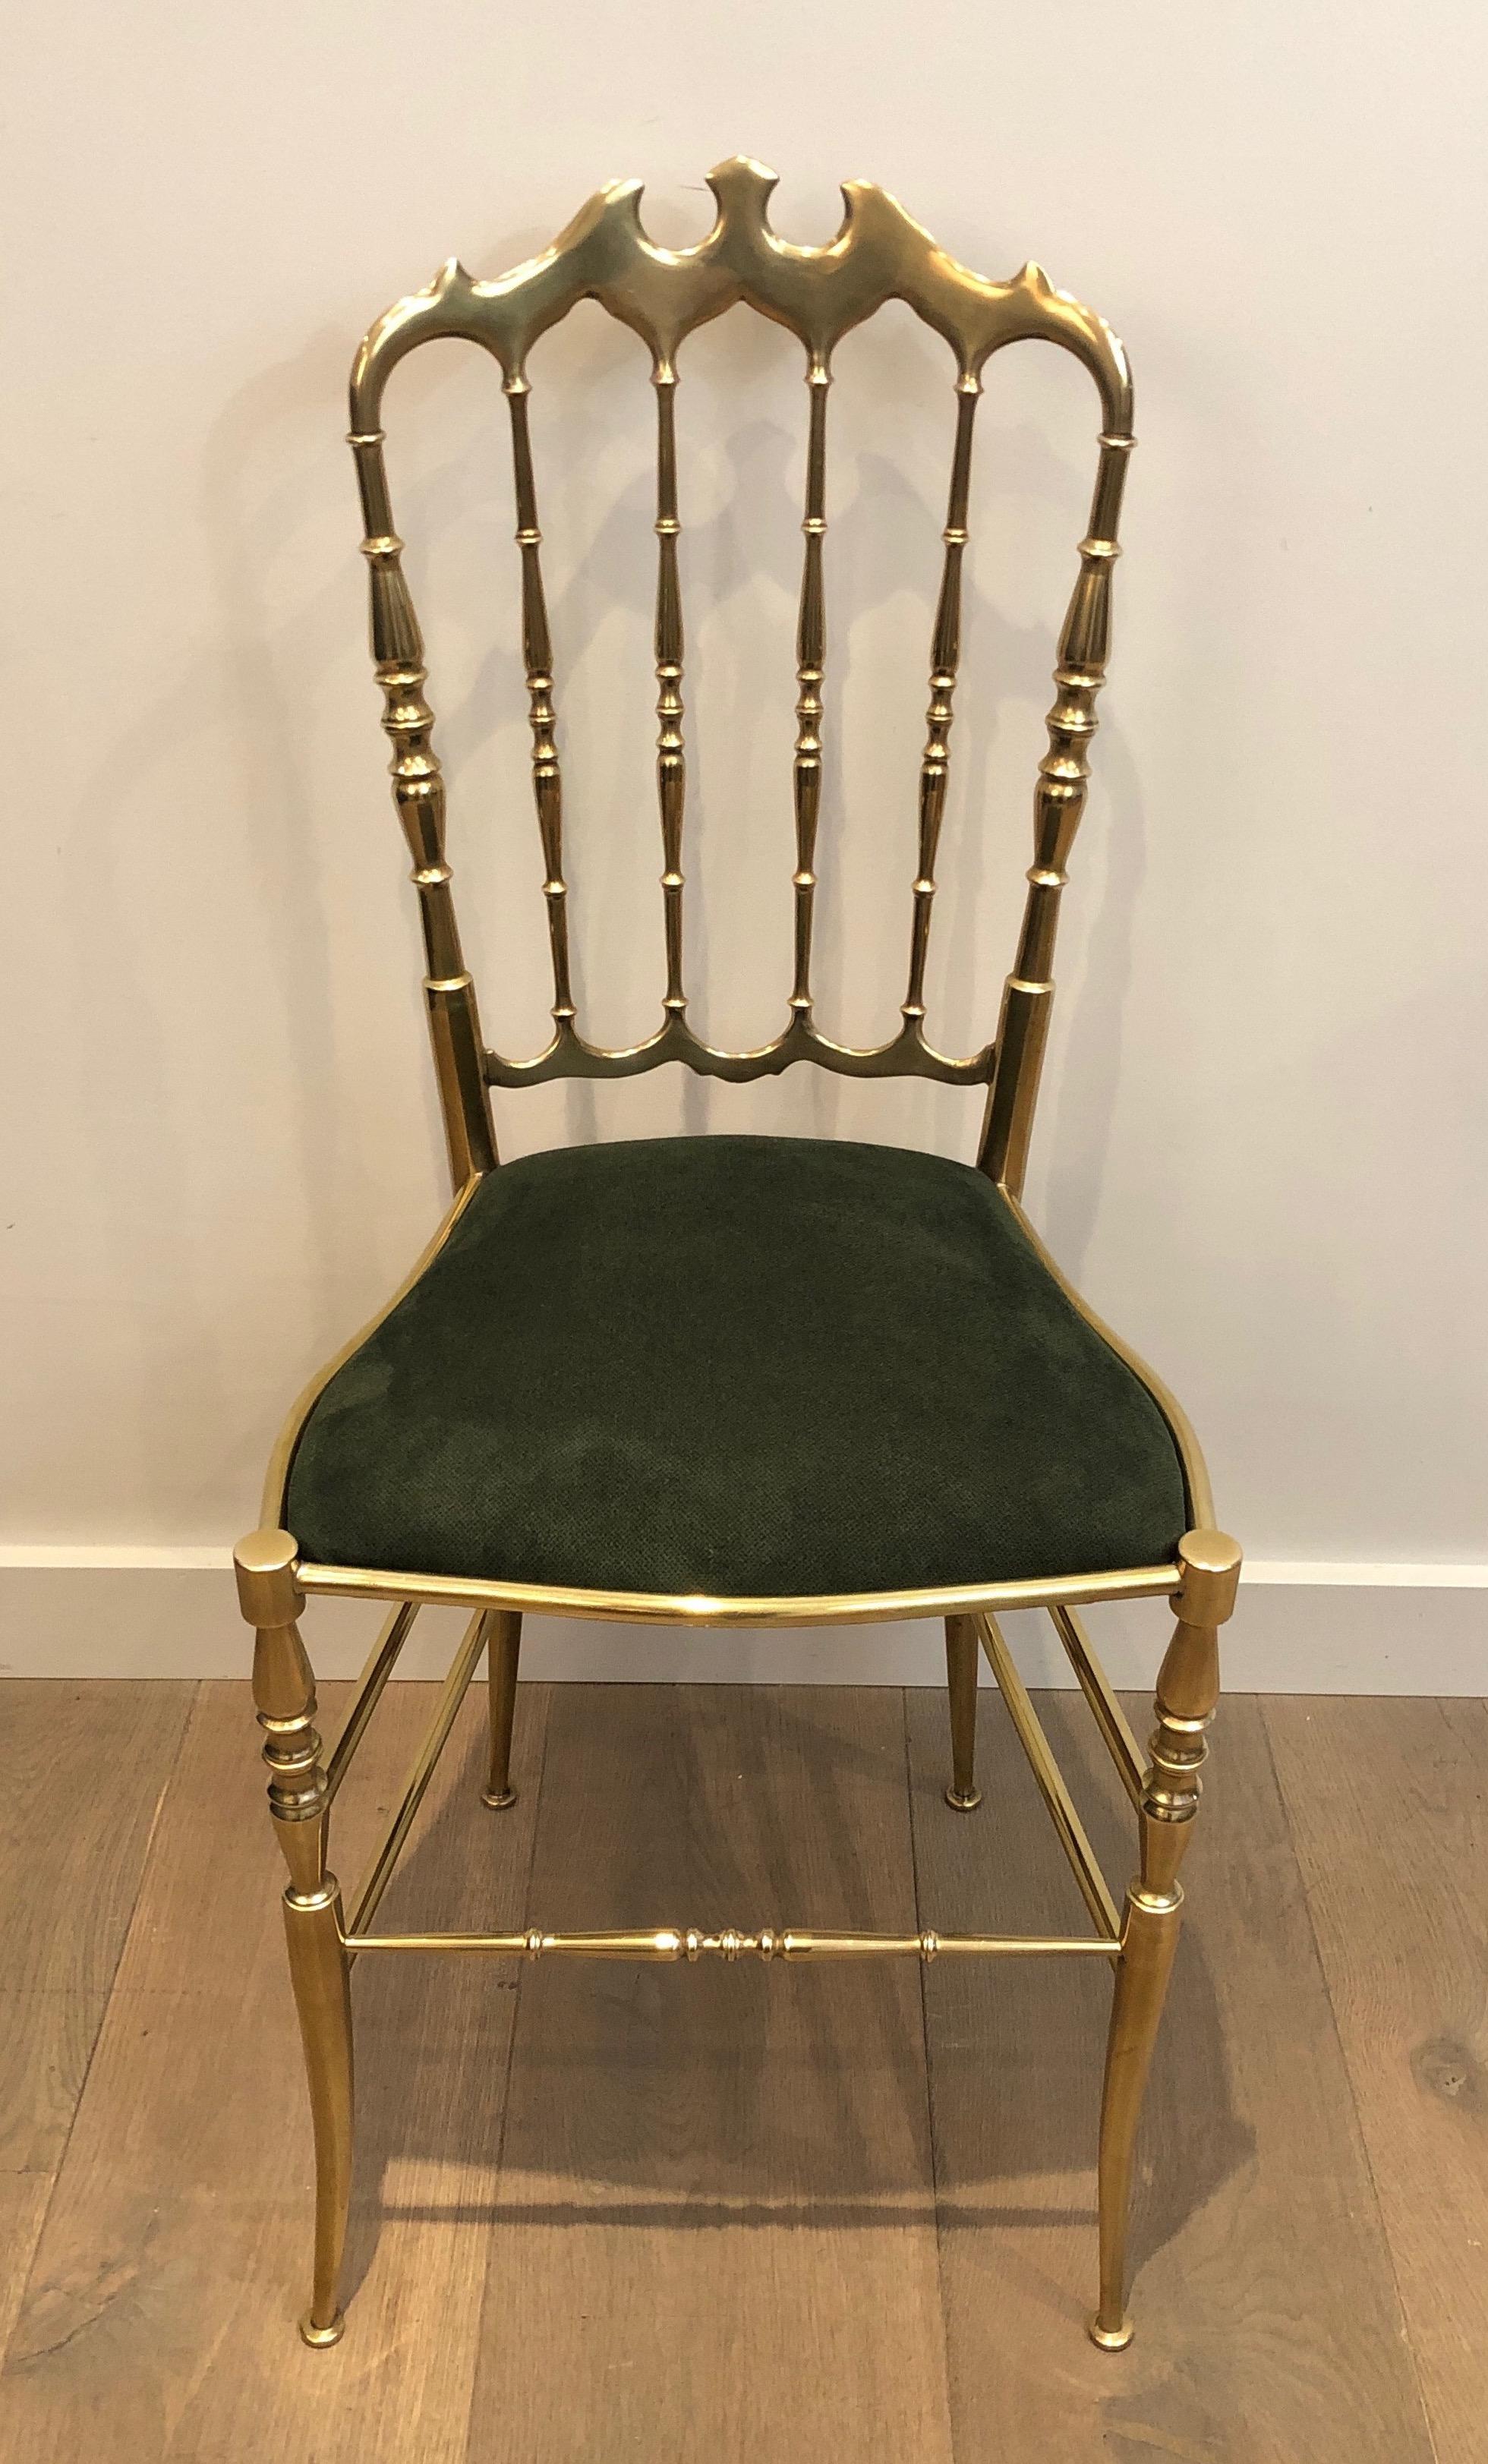 Rare Suite of 6 Beautifully Crafted Brass Chiavari Chairs, Seats Green Covered 3